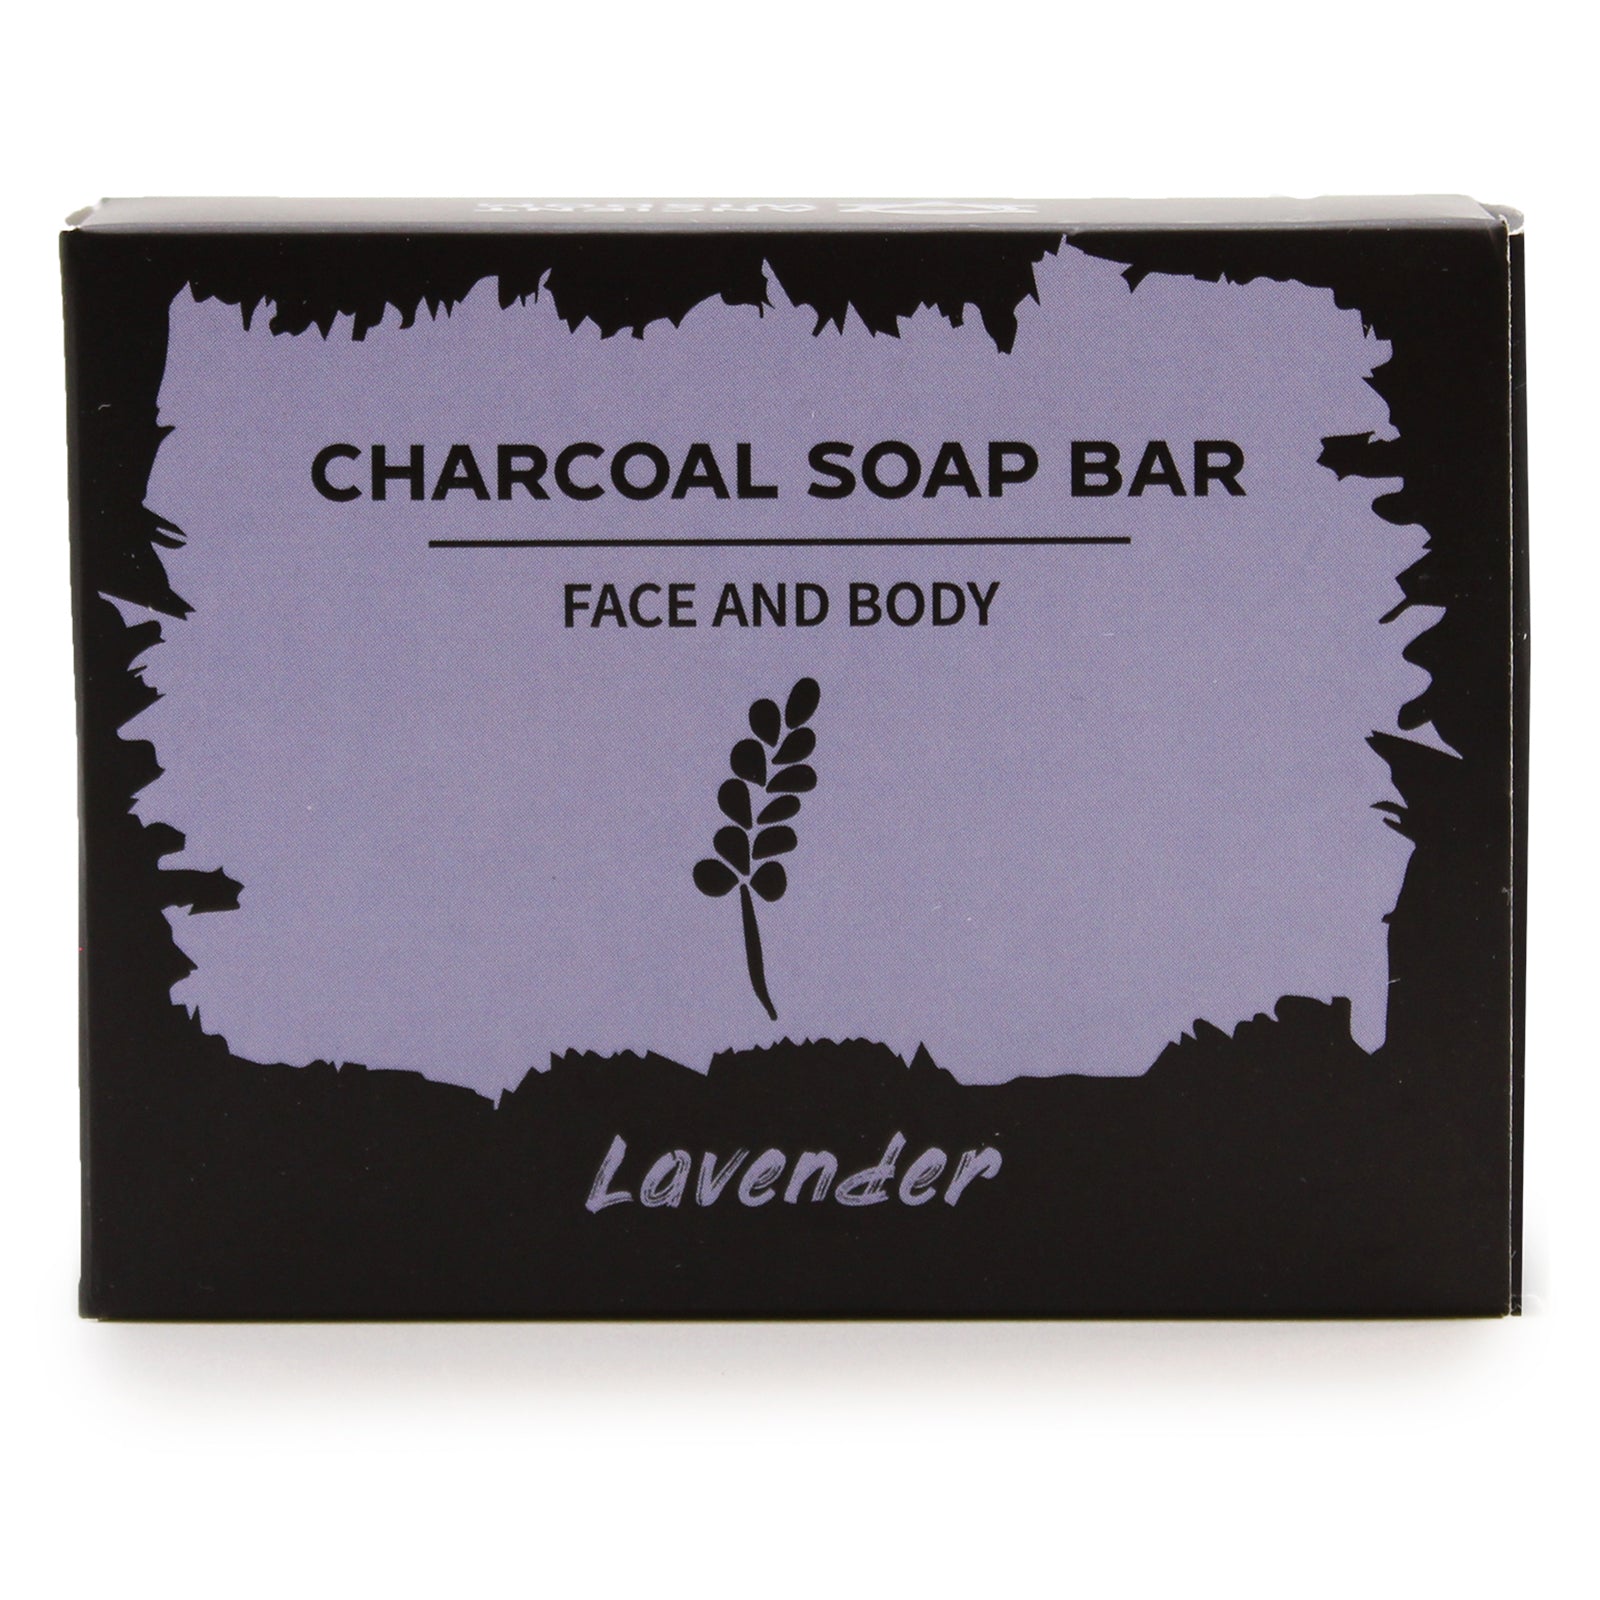 View Charcoal Soap 85g Lavender information